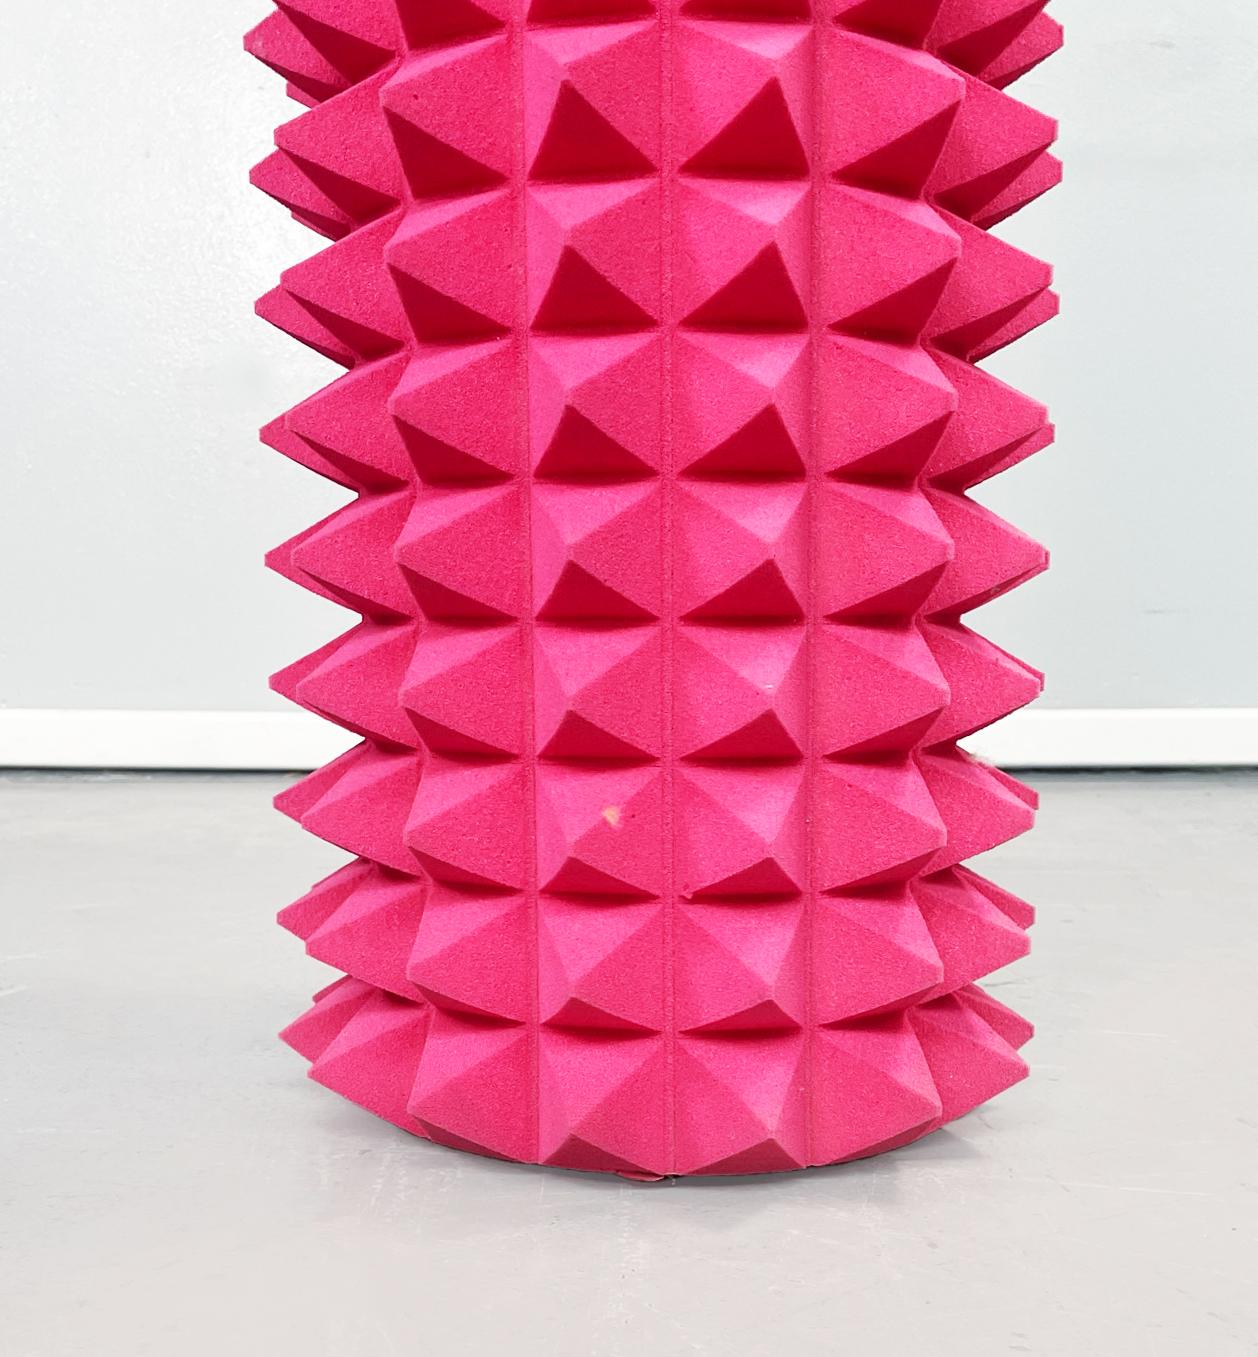 Contemporary Italian Post-Modern Cylindrical TOTEM with Pyramids in Pink Foam, 1980-2000s